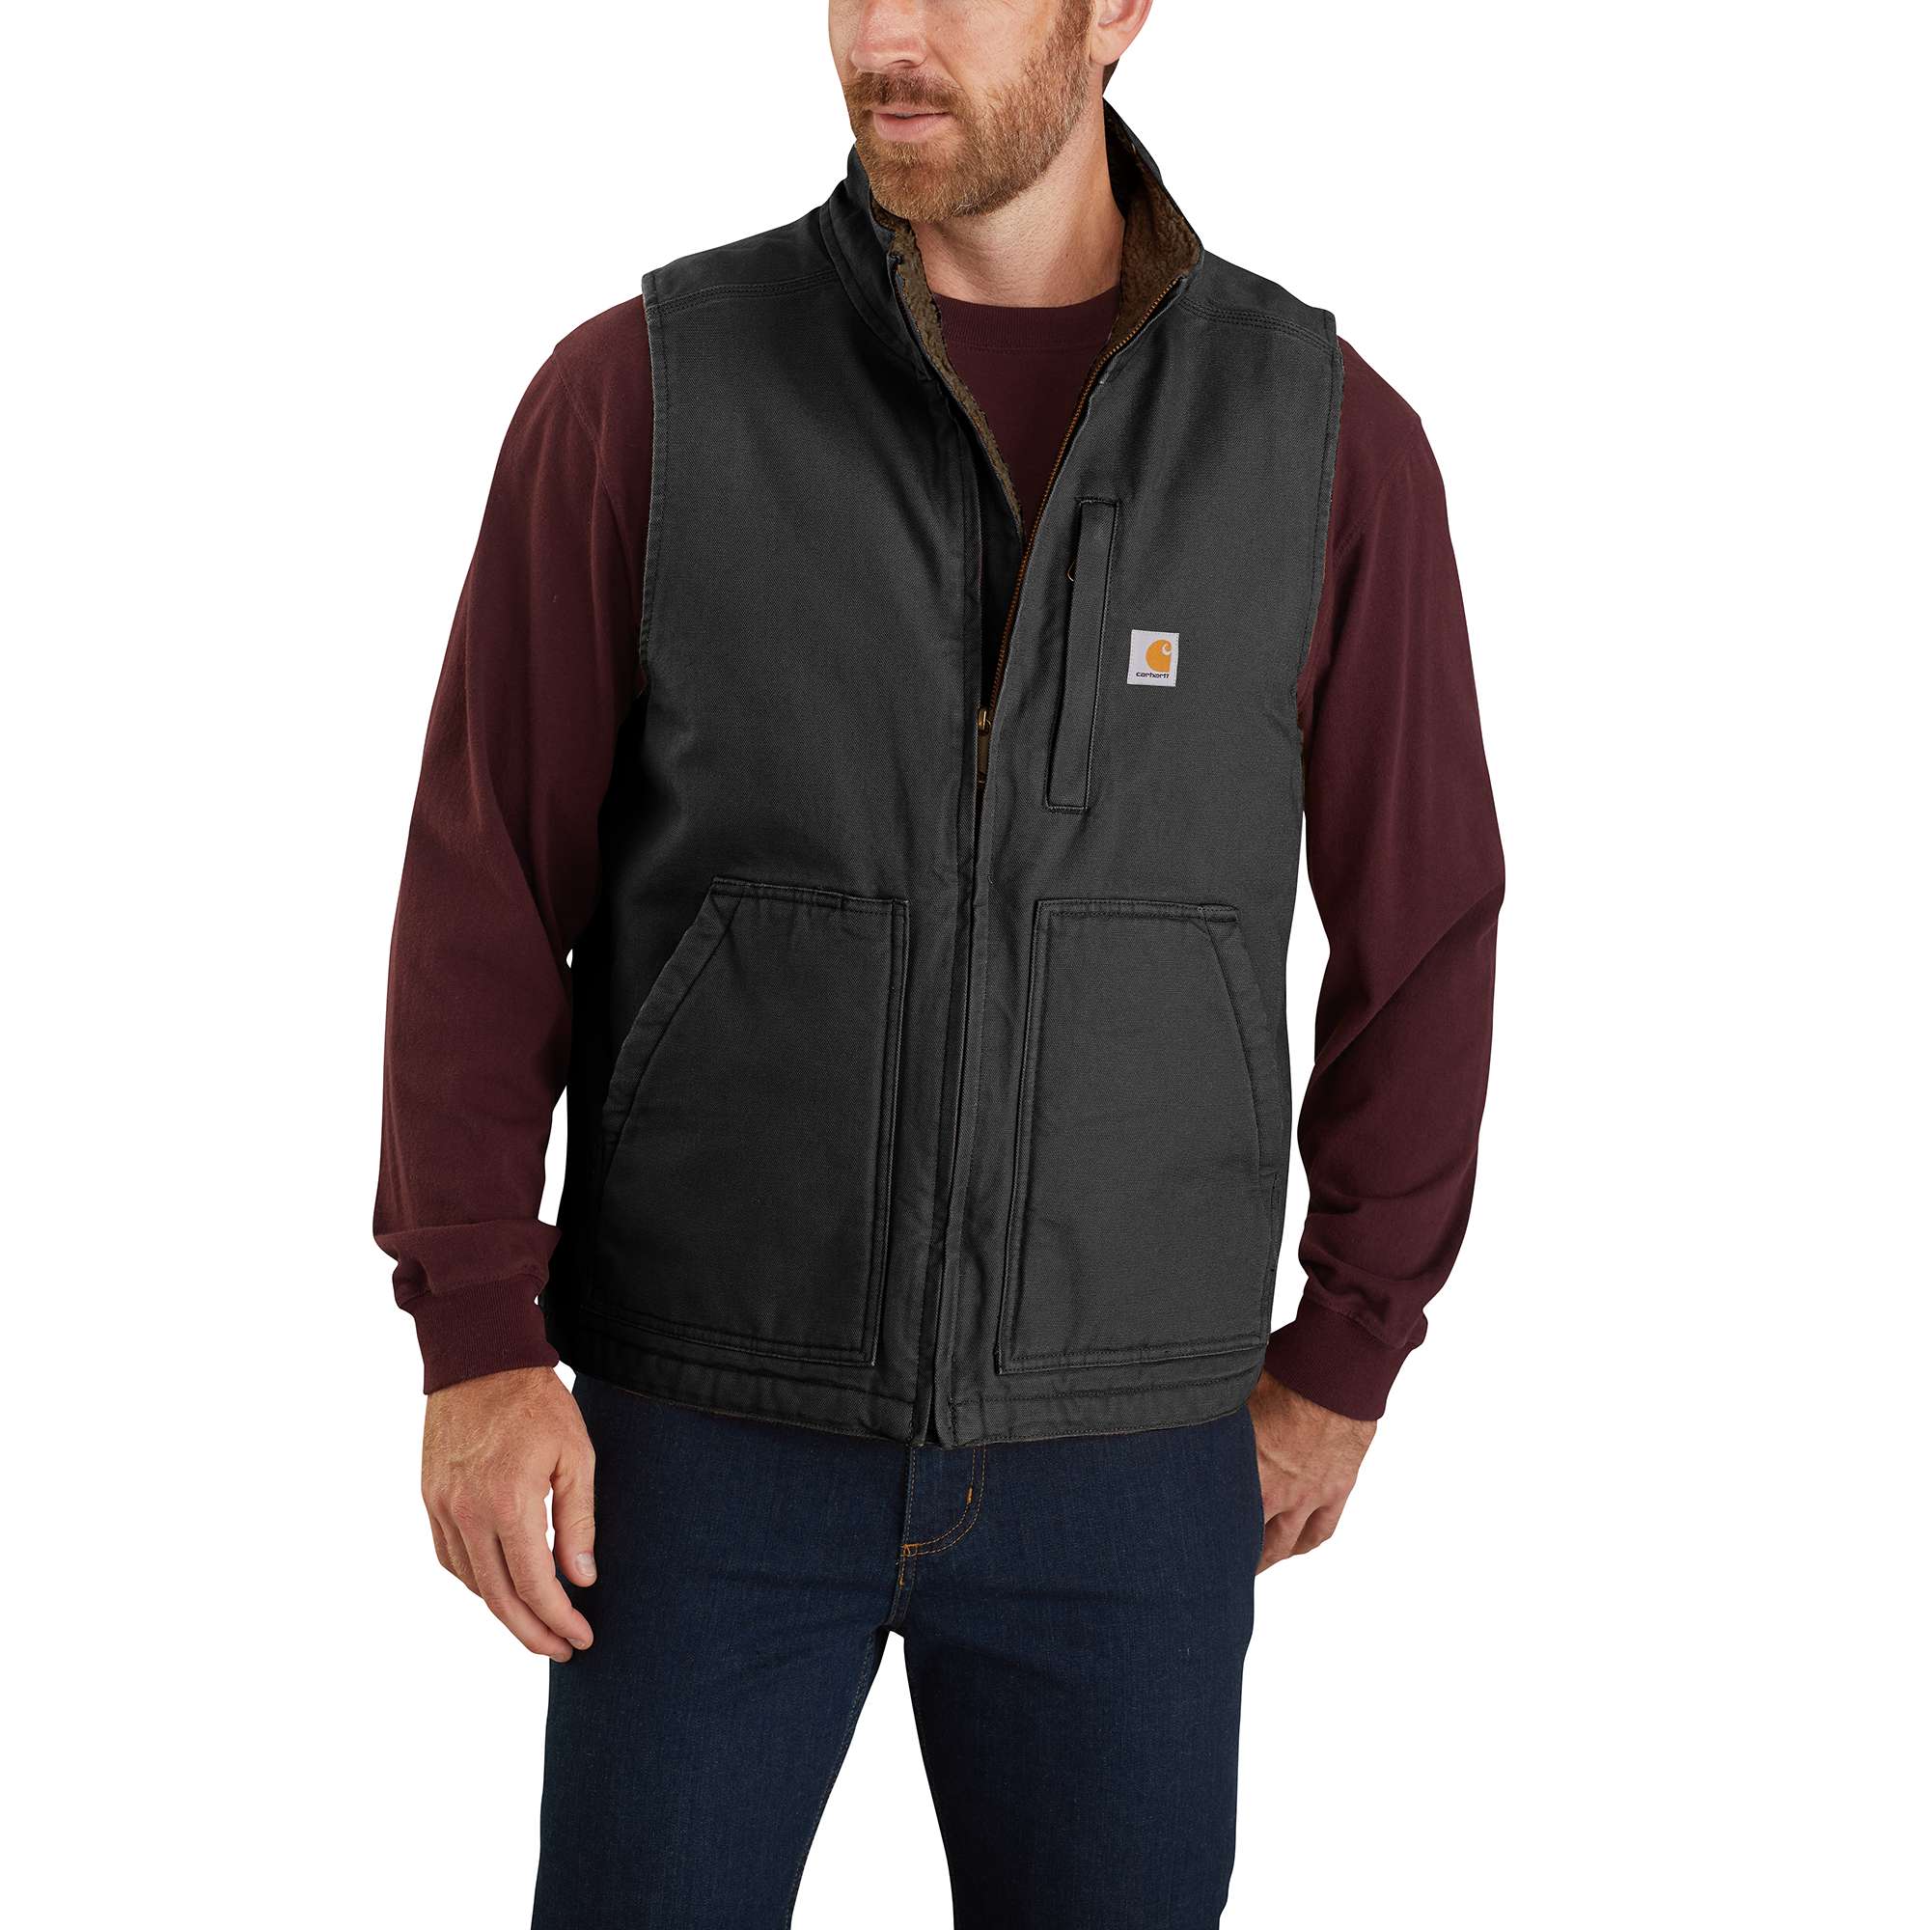 Carhartt Warranty - Learn About Our Product Warranty Policy